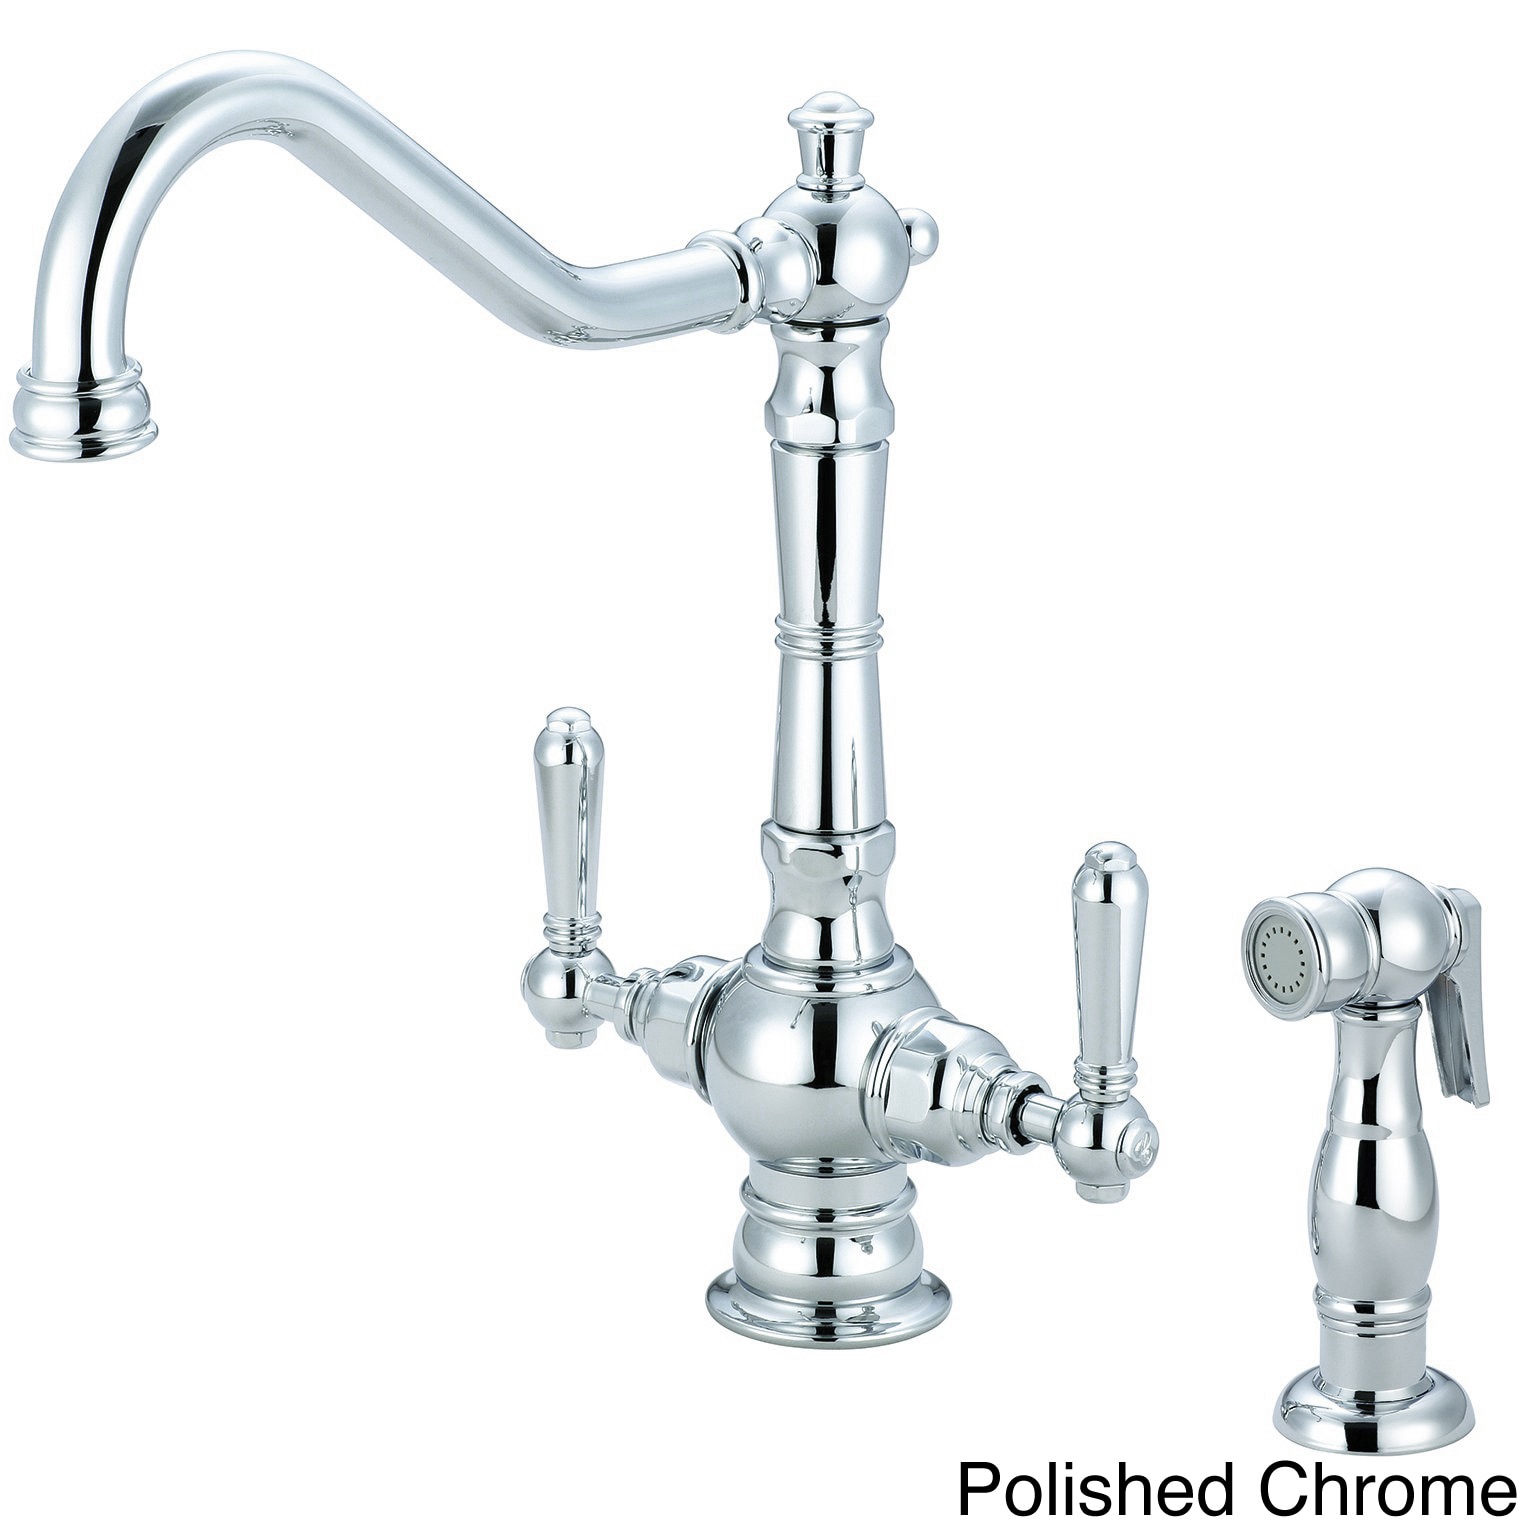 Pioneer Americana Series Two handle Kitchen Faucet With Sprayer